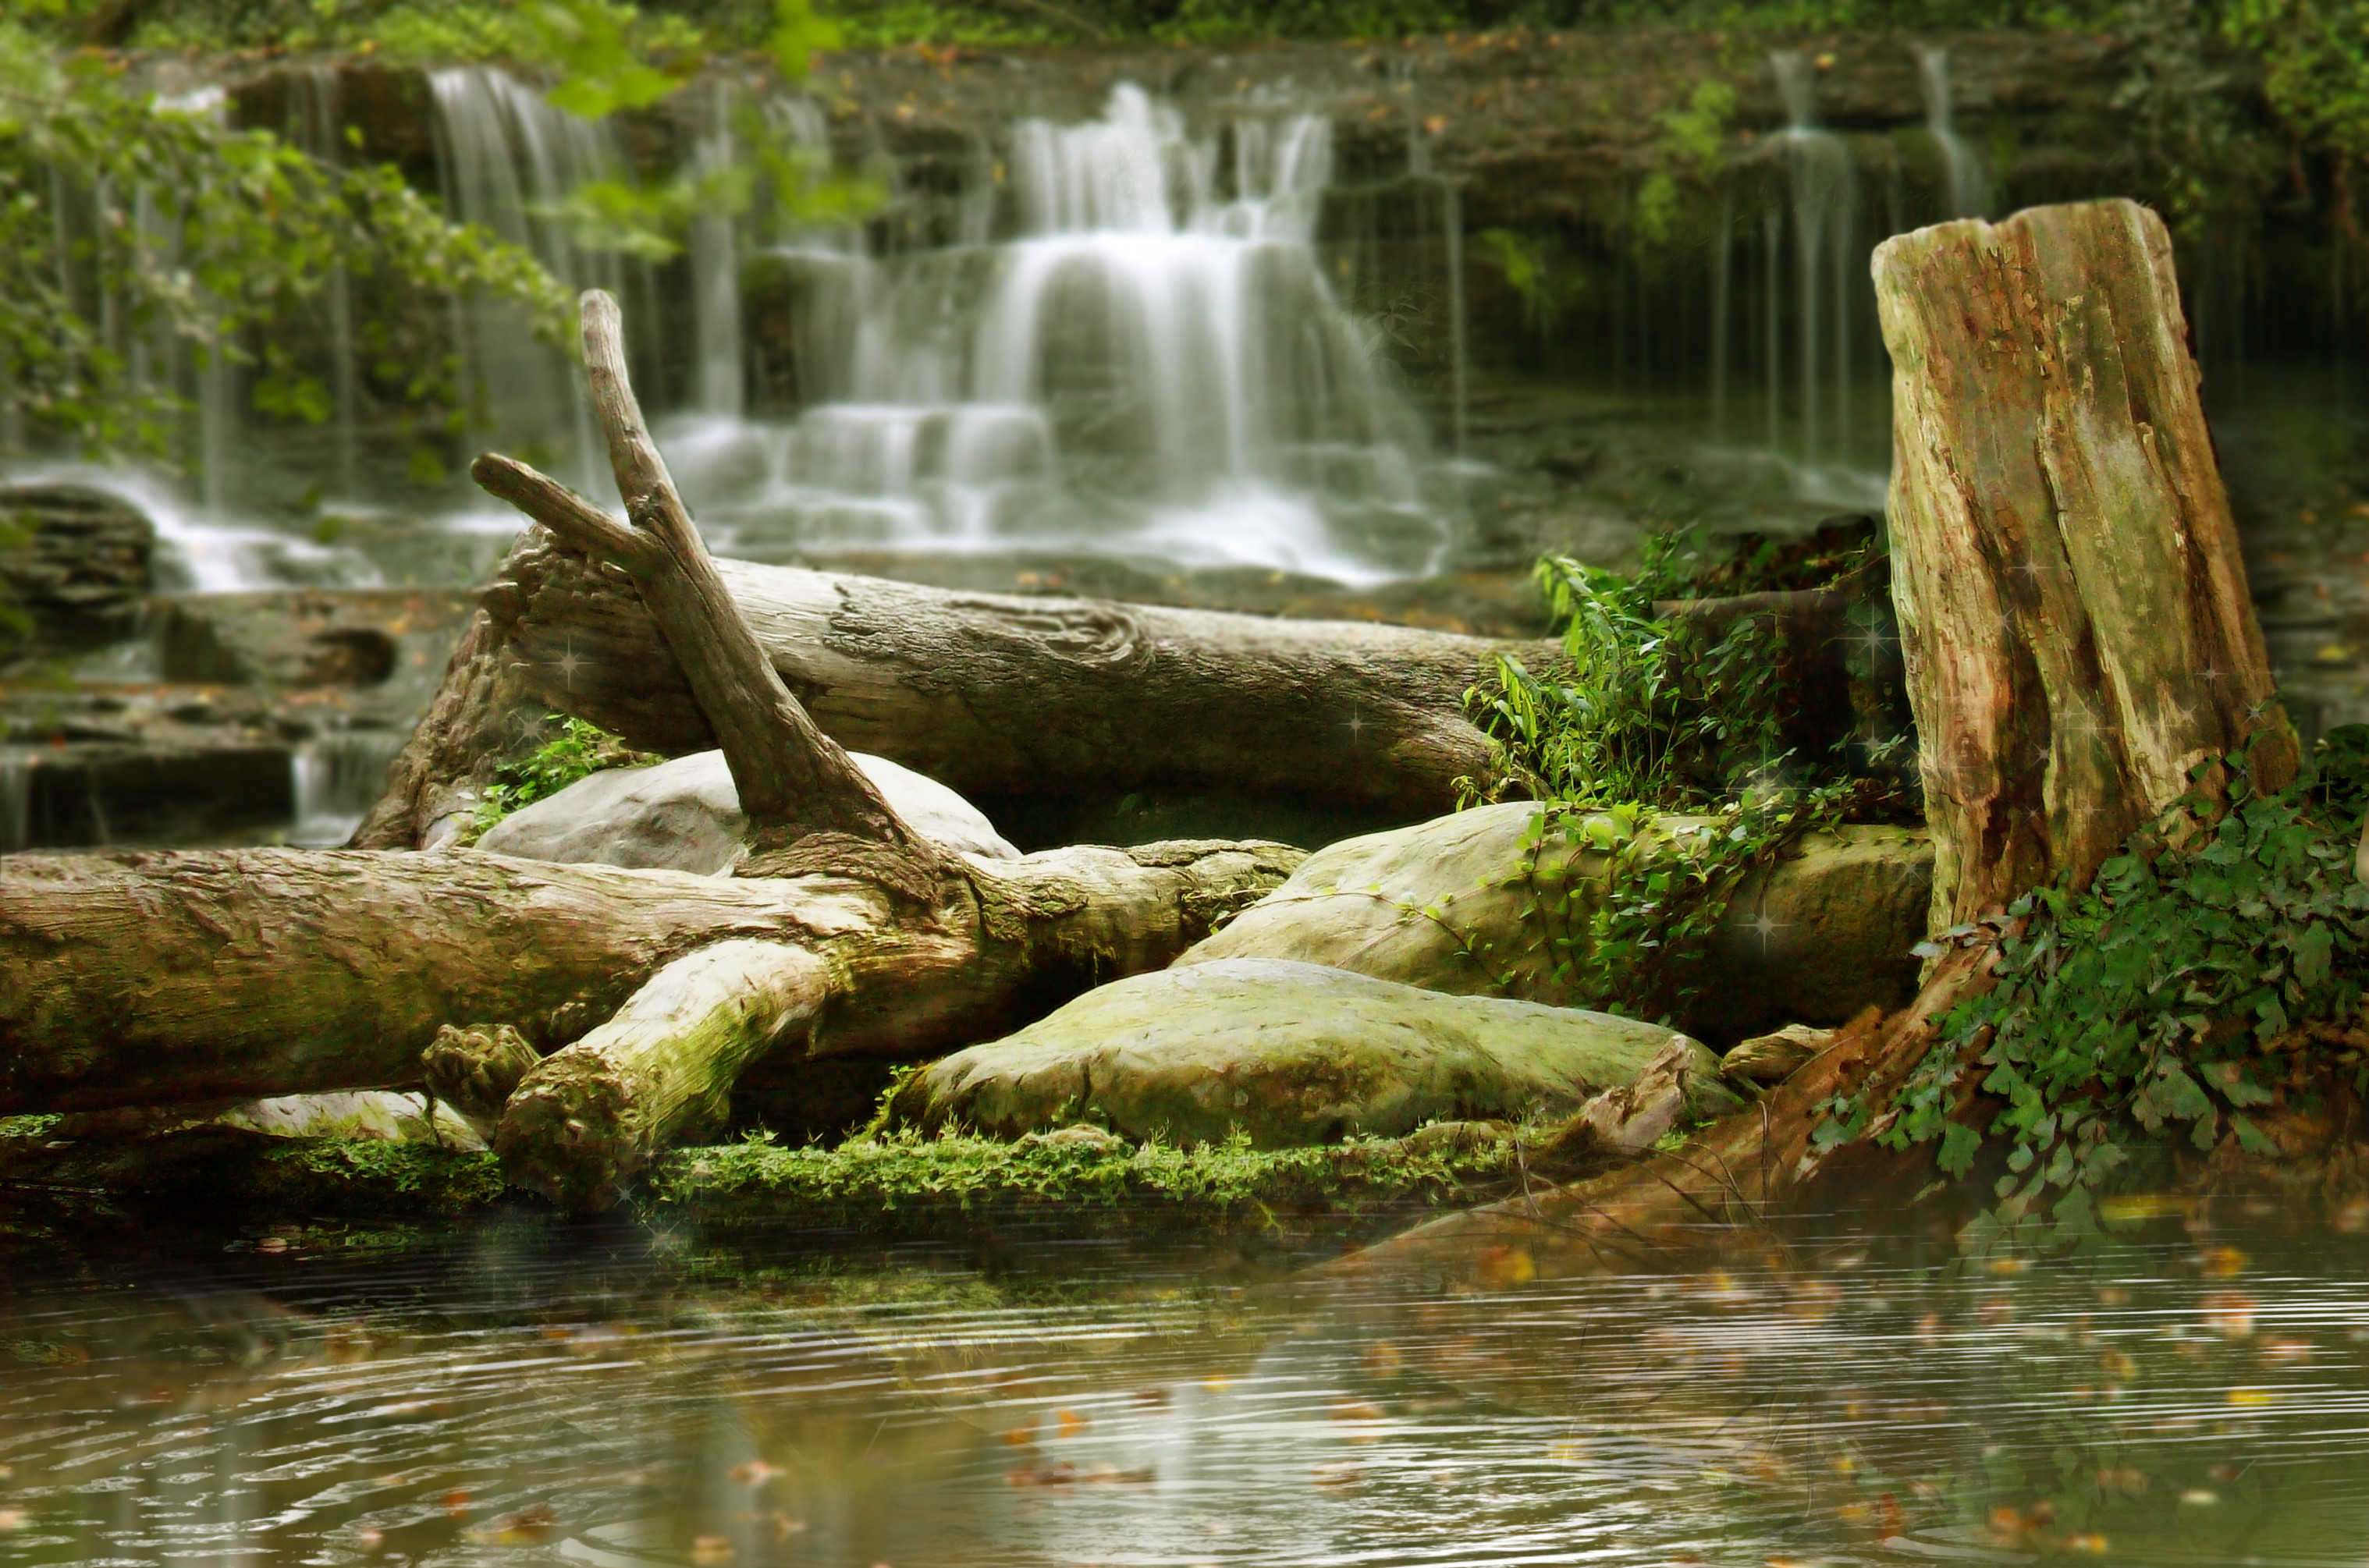 3036x2010 Forest waterfall background by malish551 Forest waterfall background by  malish551